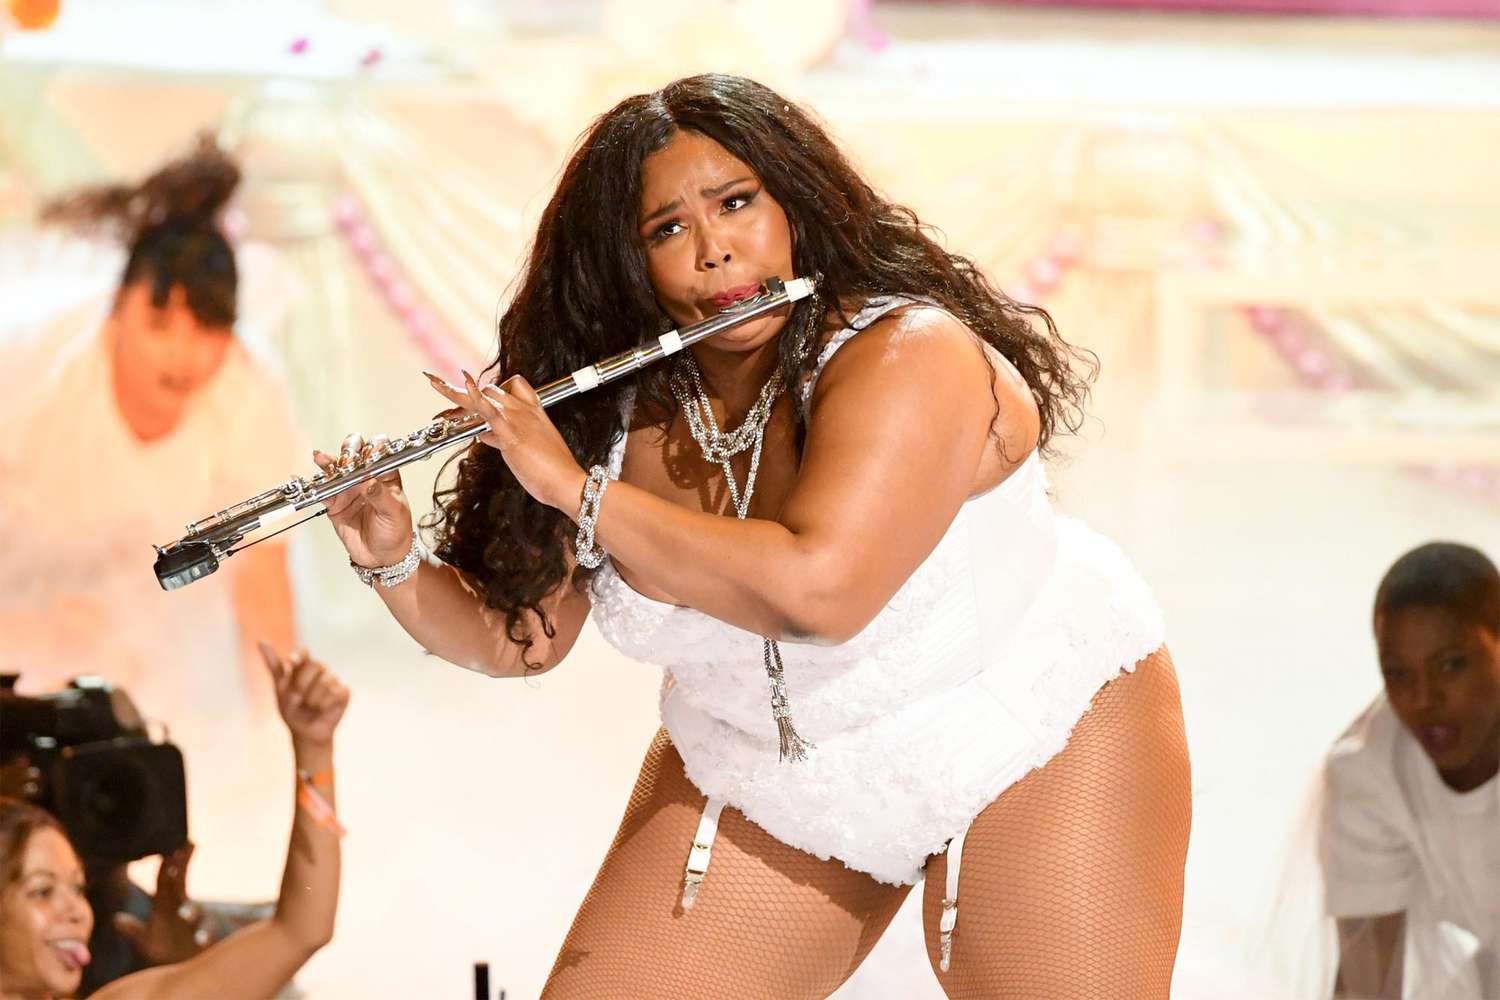 LOS ANGELES, CALIFORNIA - JUNE 23: Lizzo performs onstage at the 2019 BET Awards on June 23, 2019 in Los Angeles, California. (Photo by Kevin Winter/Getty Images)